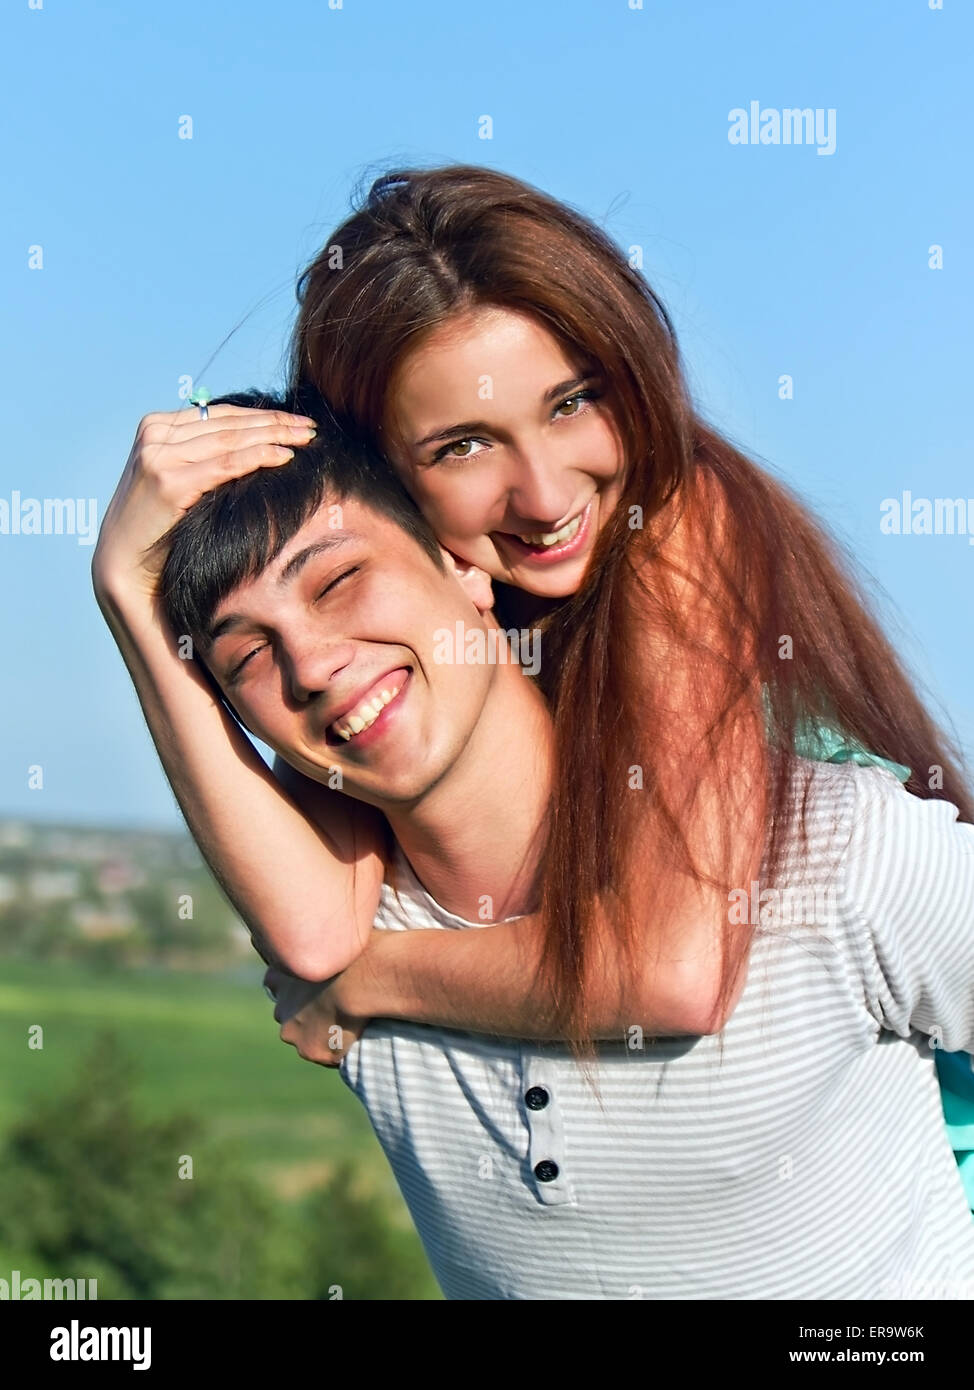 Young guy and girl having fun in the summer outdoors Stock Photo